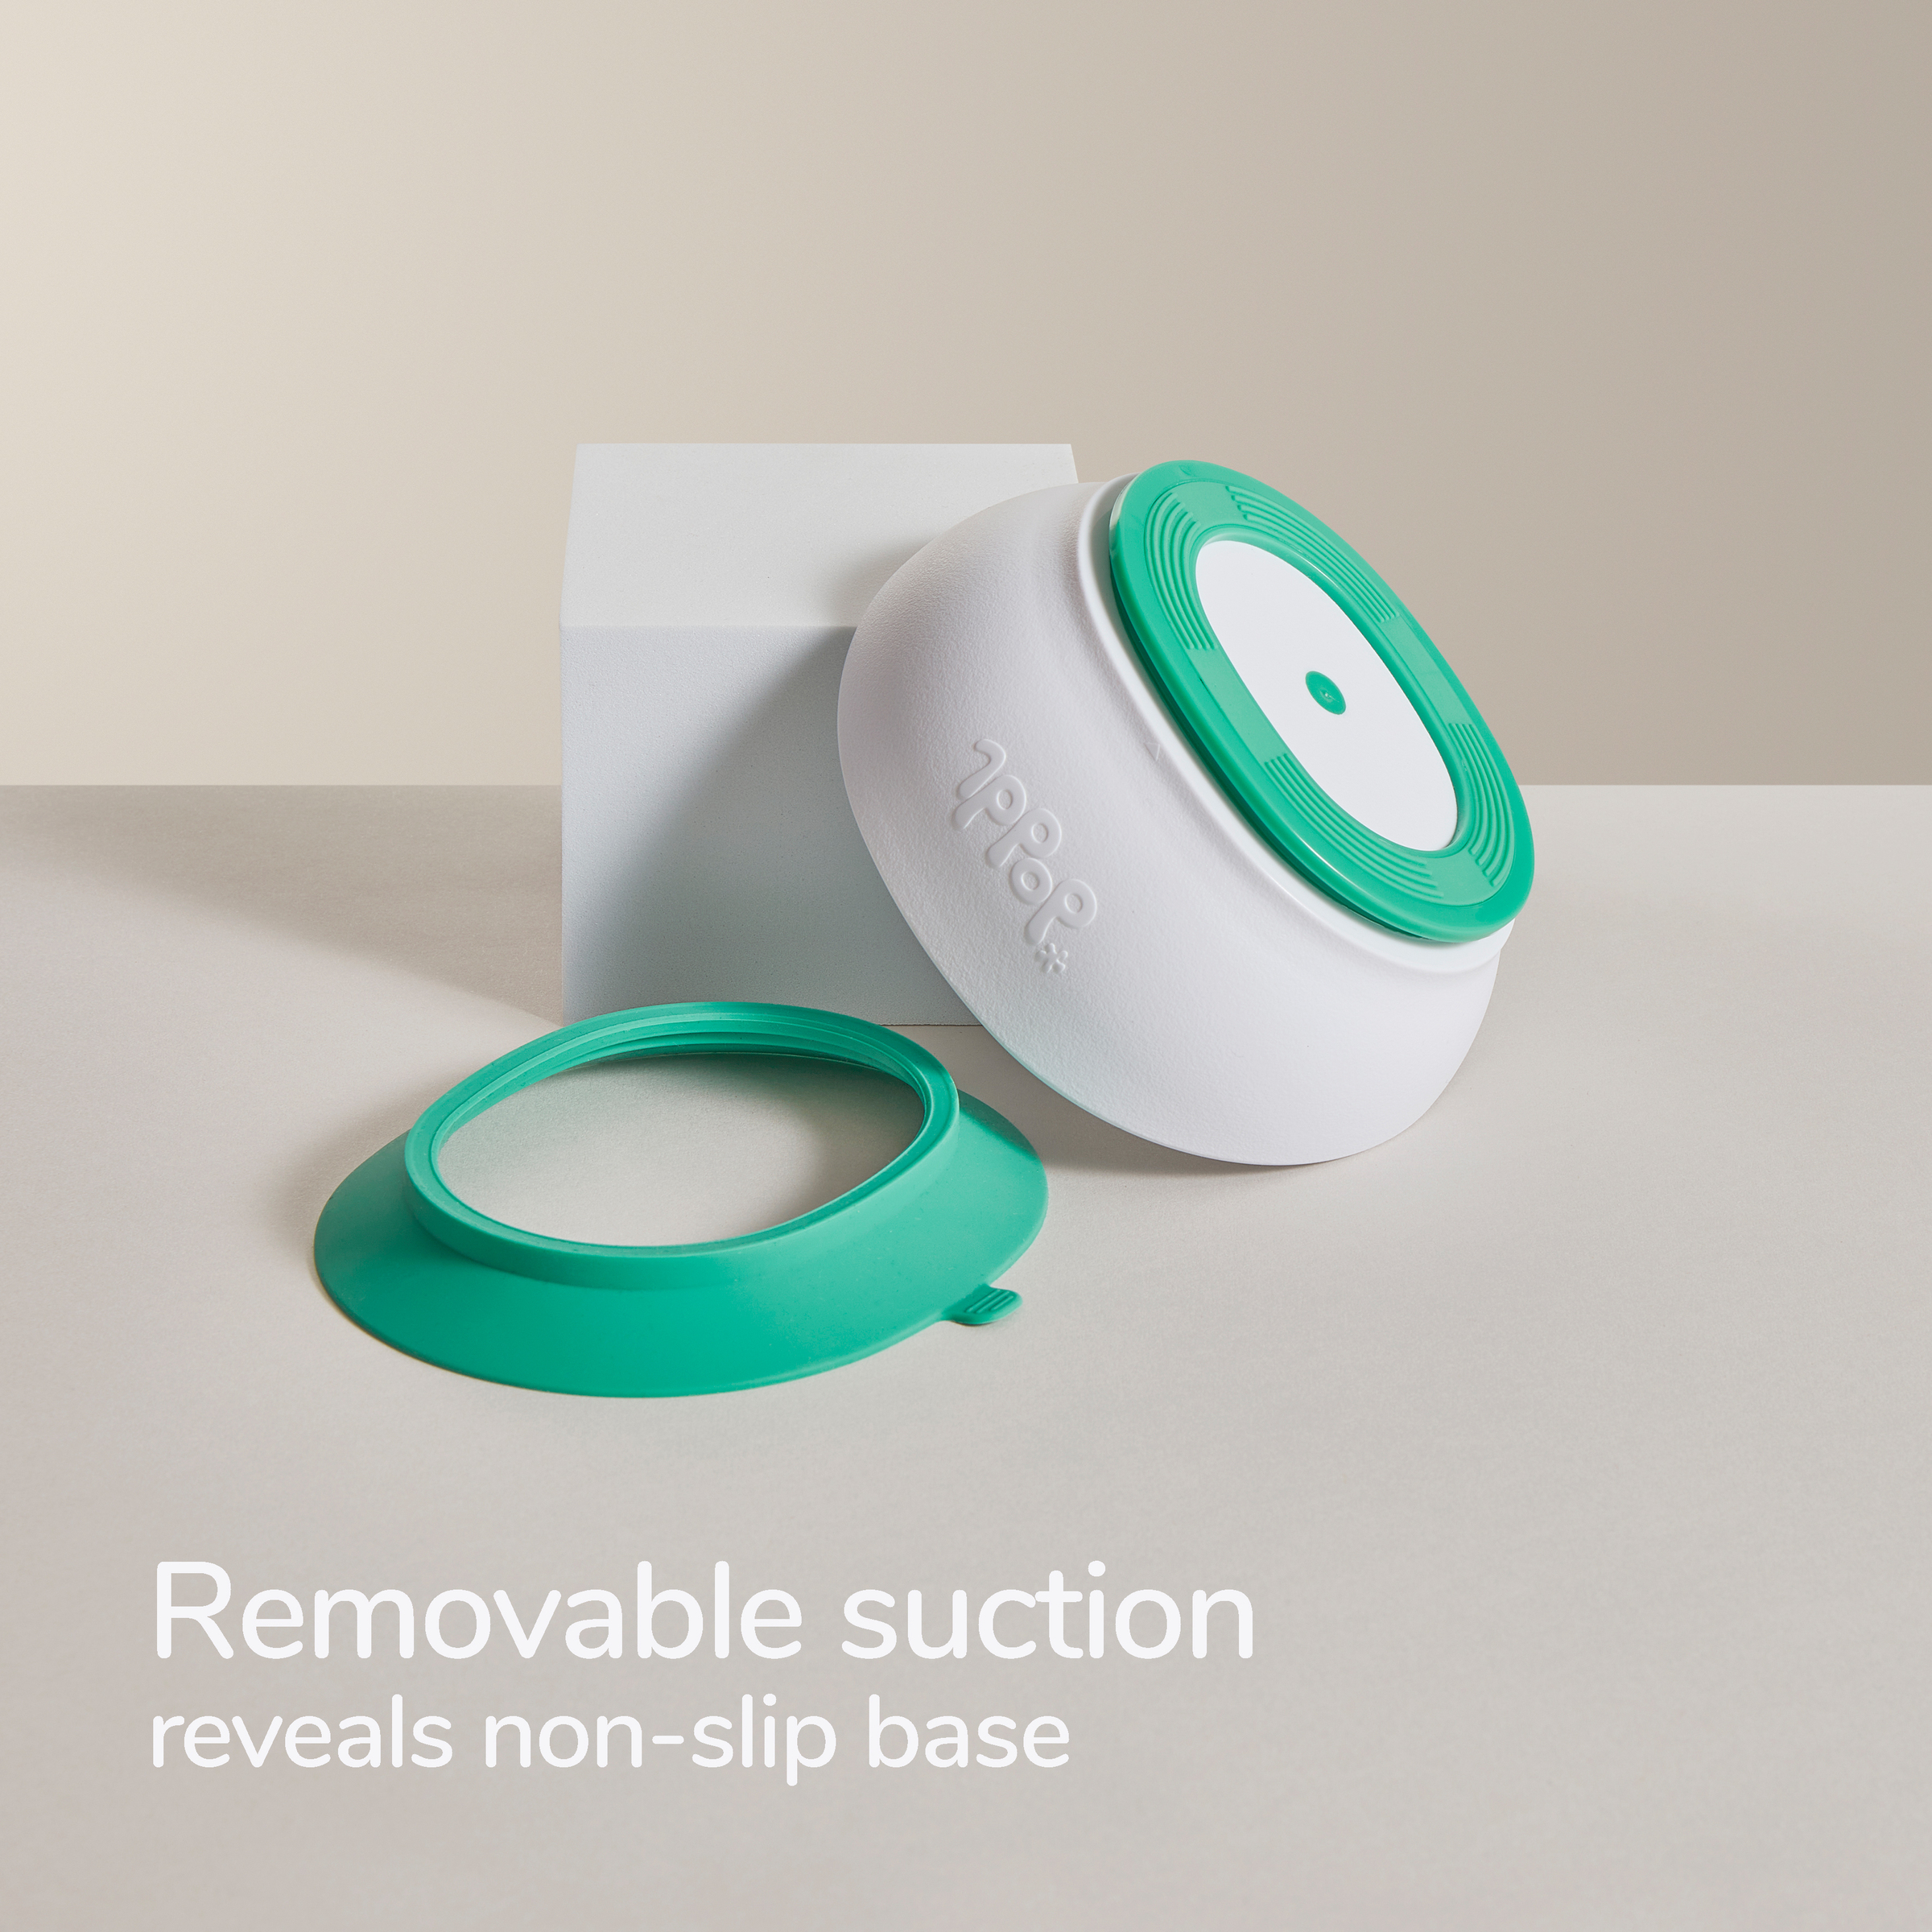 DOD011 Removable suction